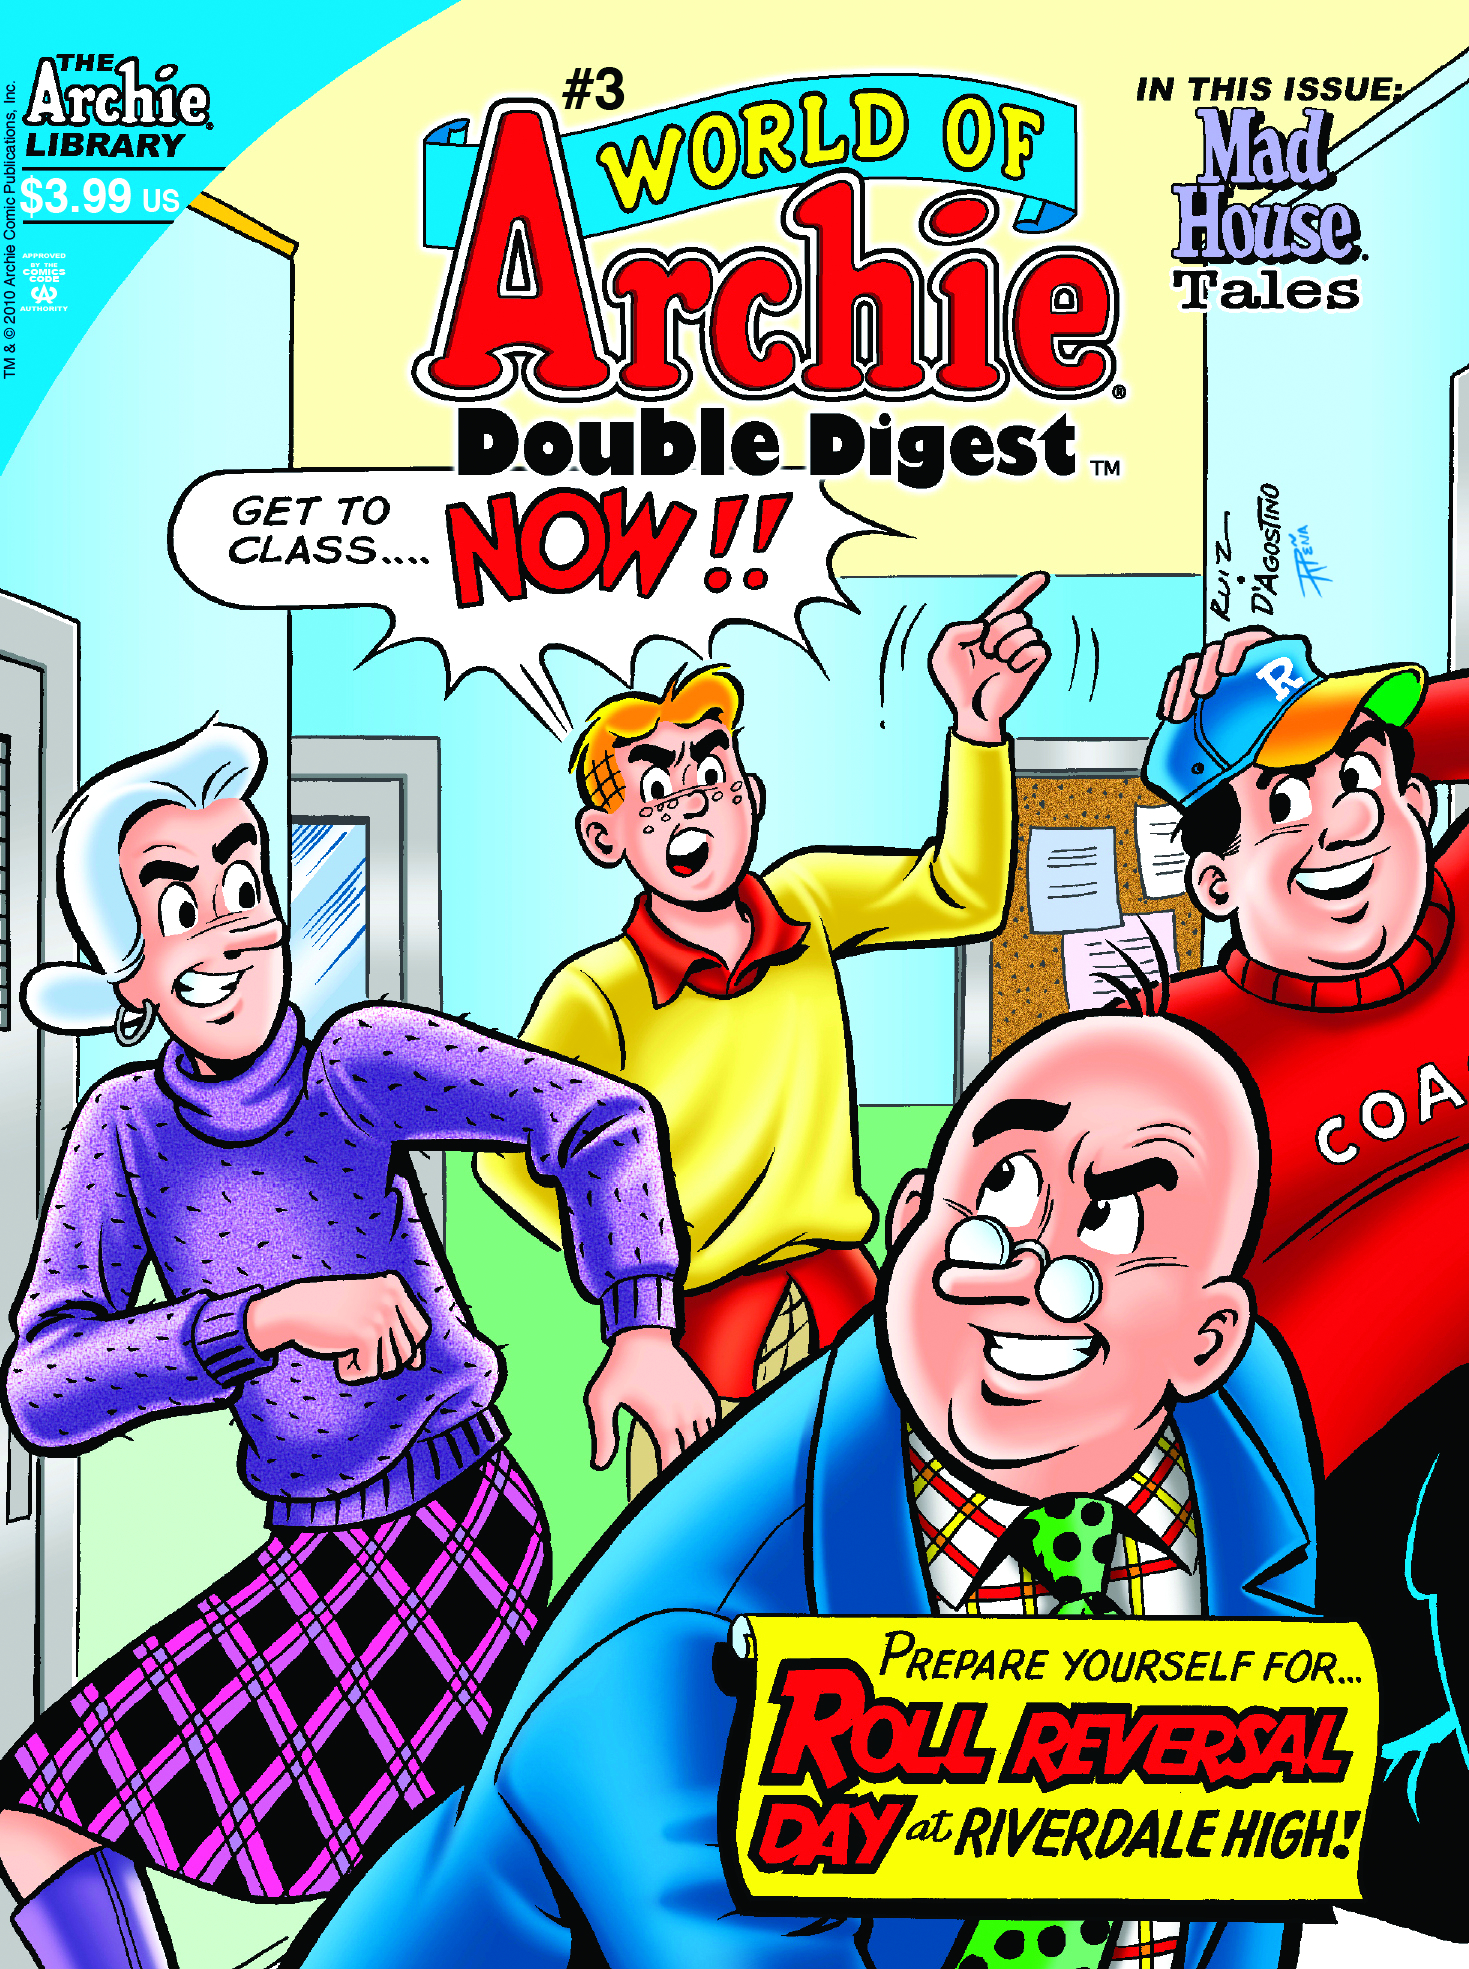 WORLD OF ARCHIE DOUBLE DIGEST #3